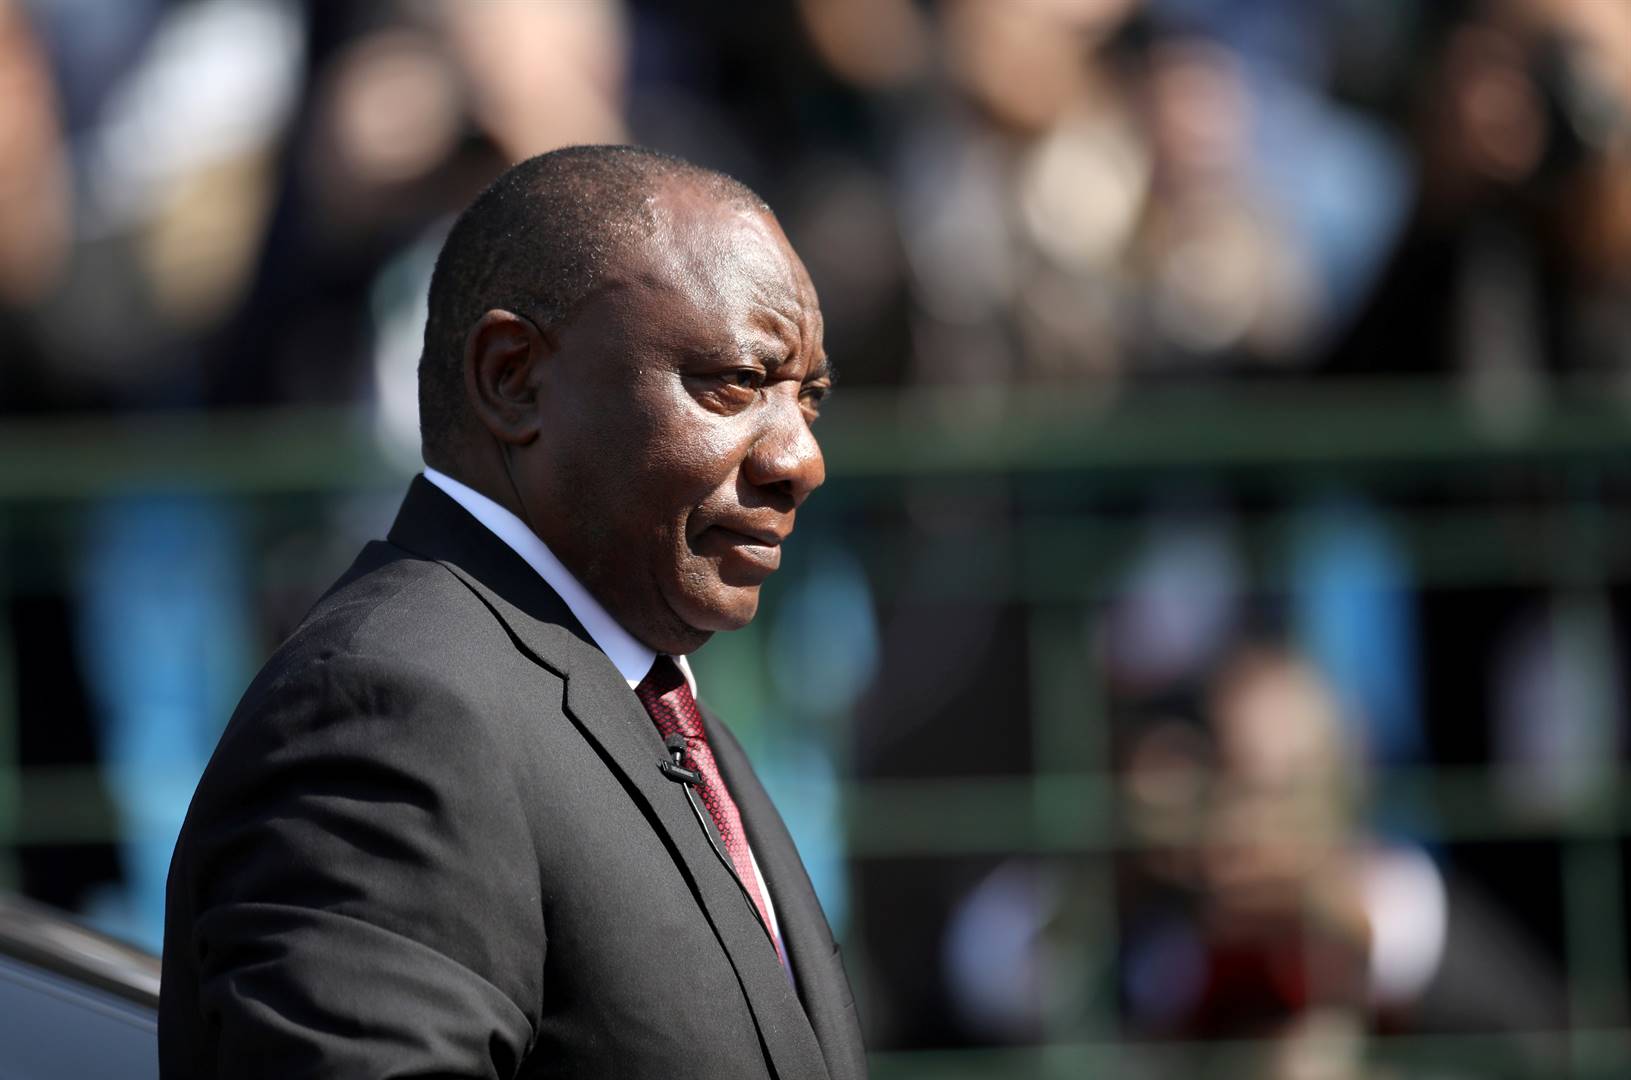 Cyril Ramaphosa still has a tough road ahead of him in terms of turning around South Africa’s embattled economy. Picture: Siphiwe Sibeko/Reuters